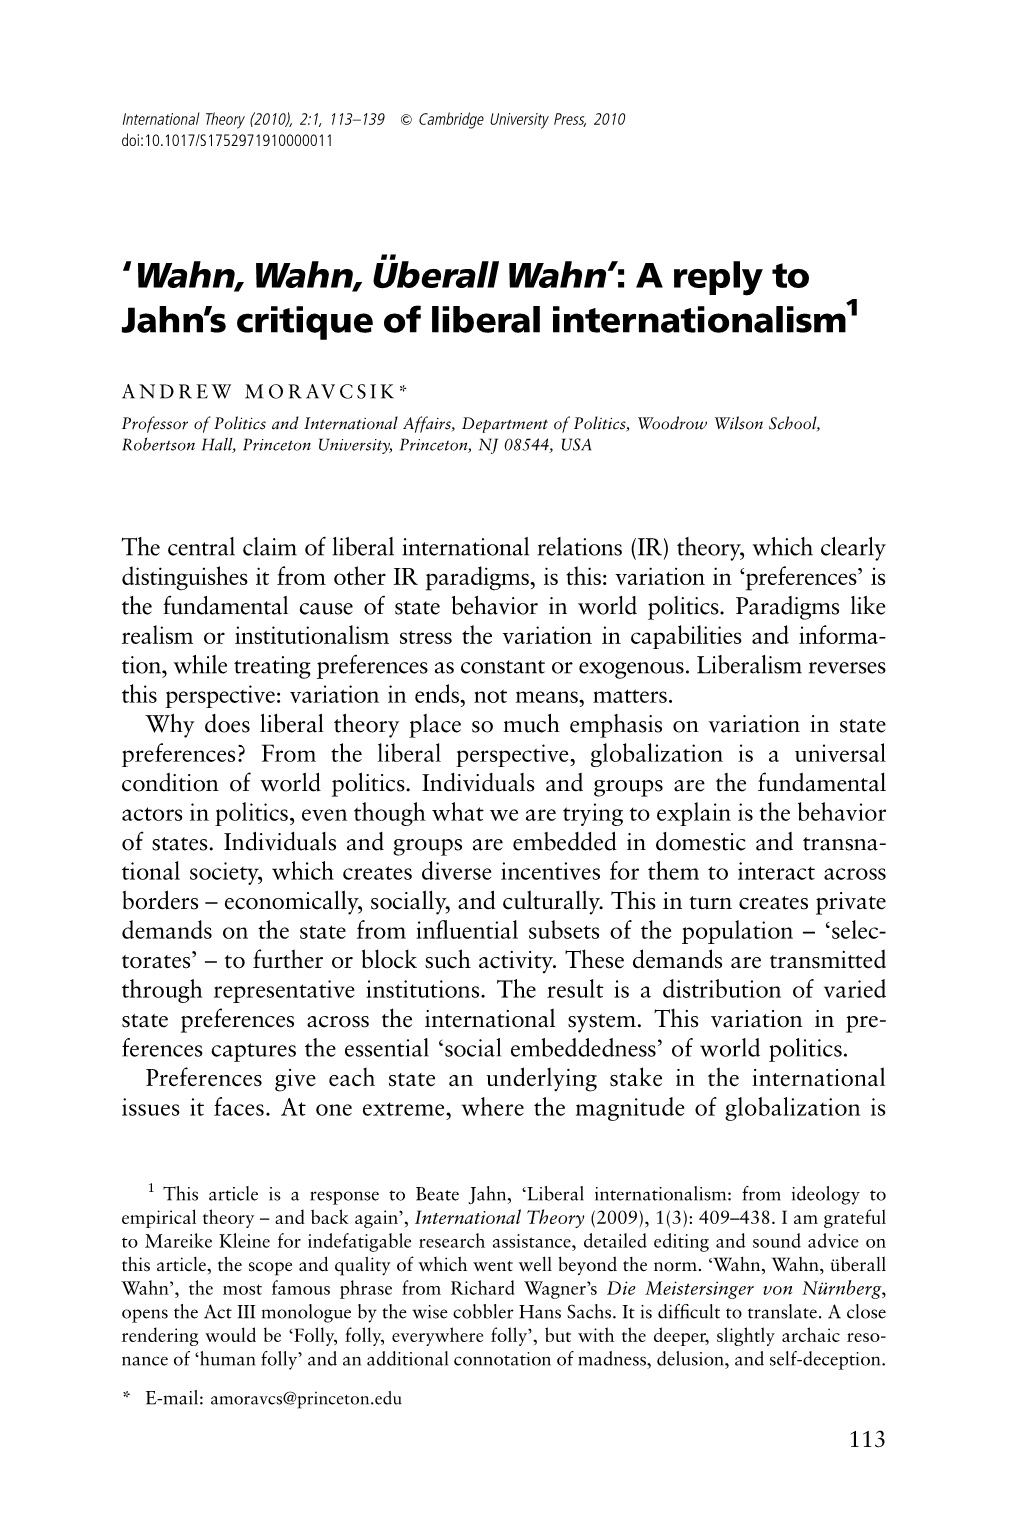 A Reply to Jahn's Critique of Liberal Internationalism